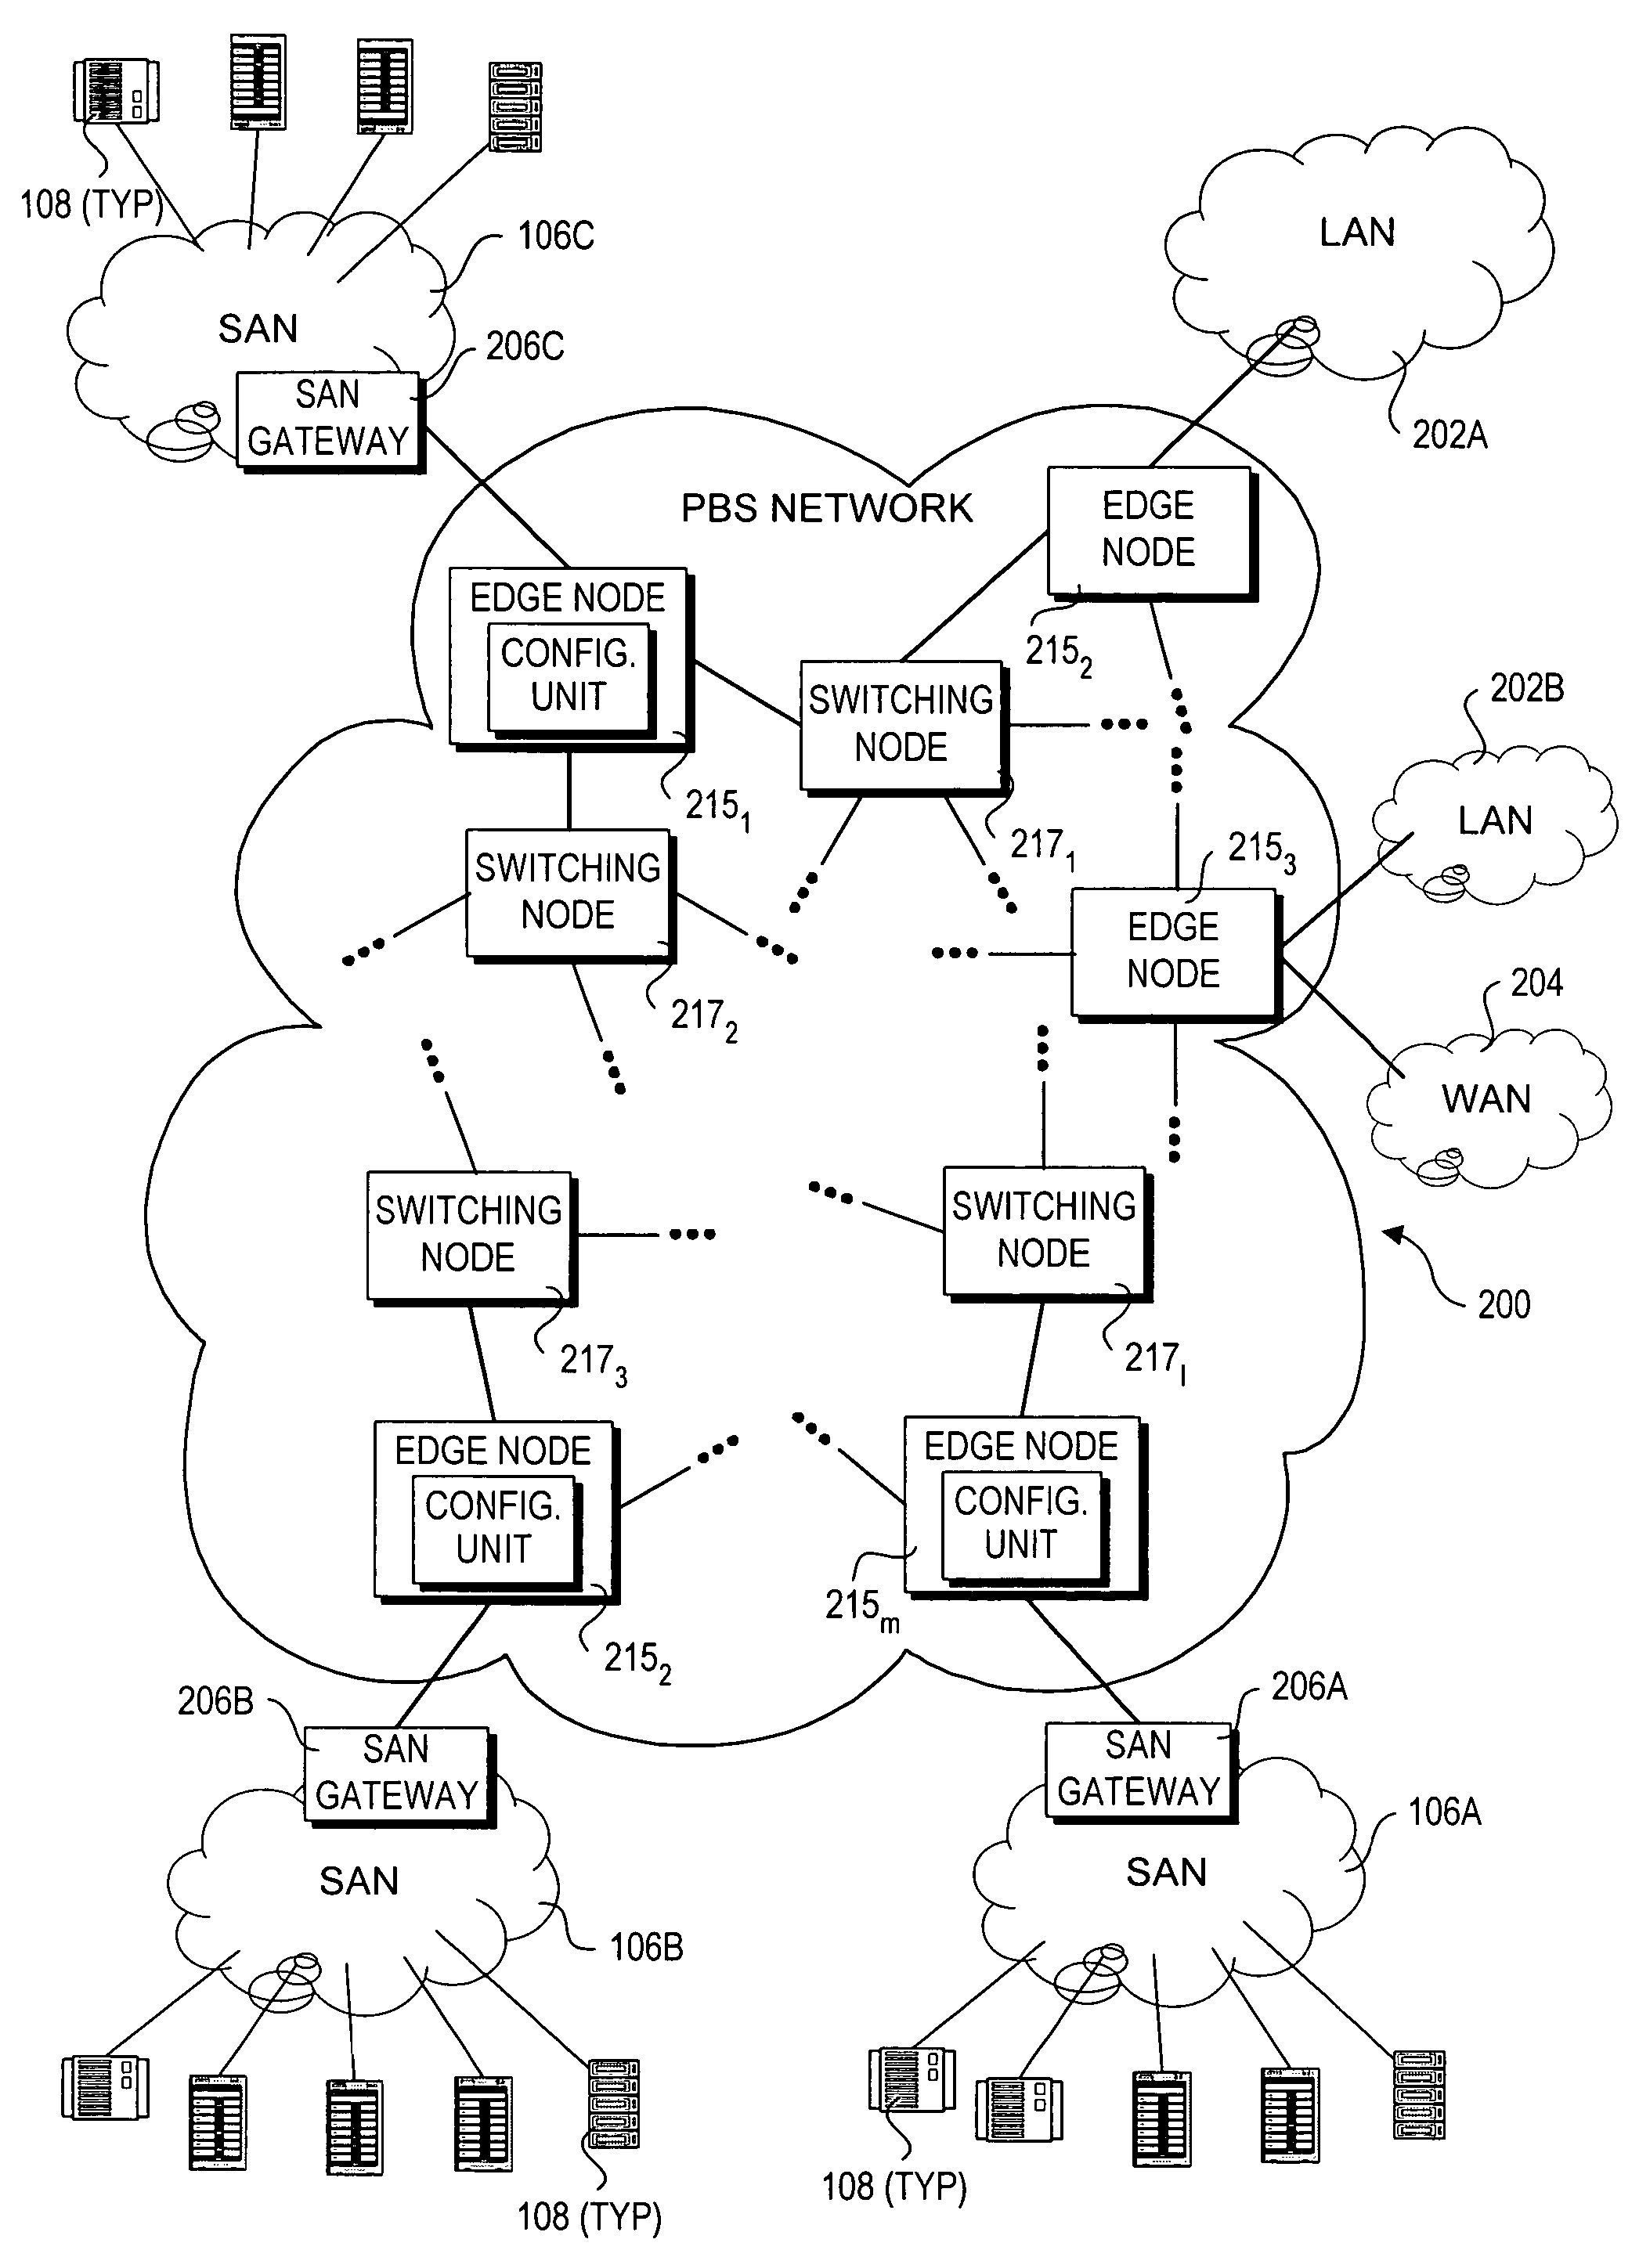 Method and architecture for optical networking between server and storage area networks